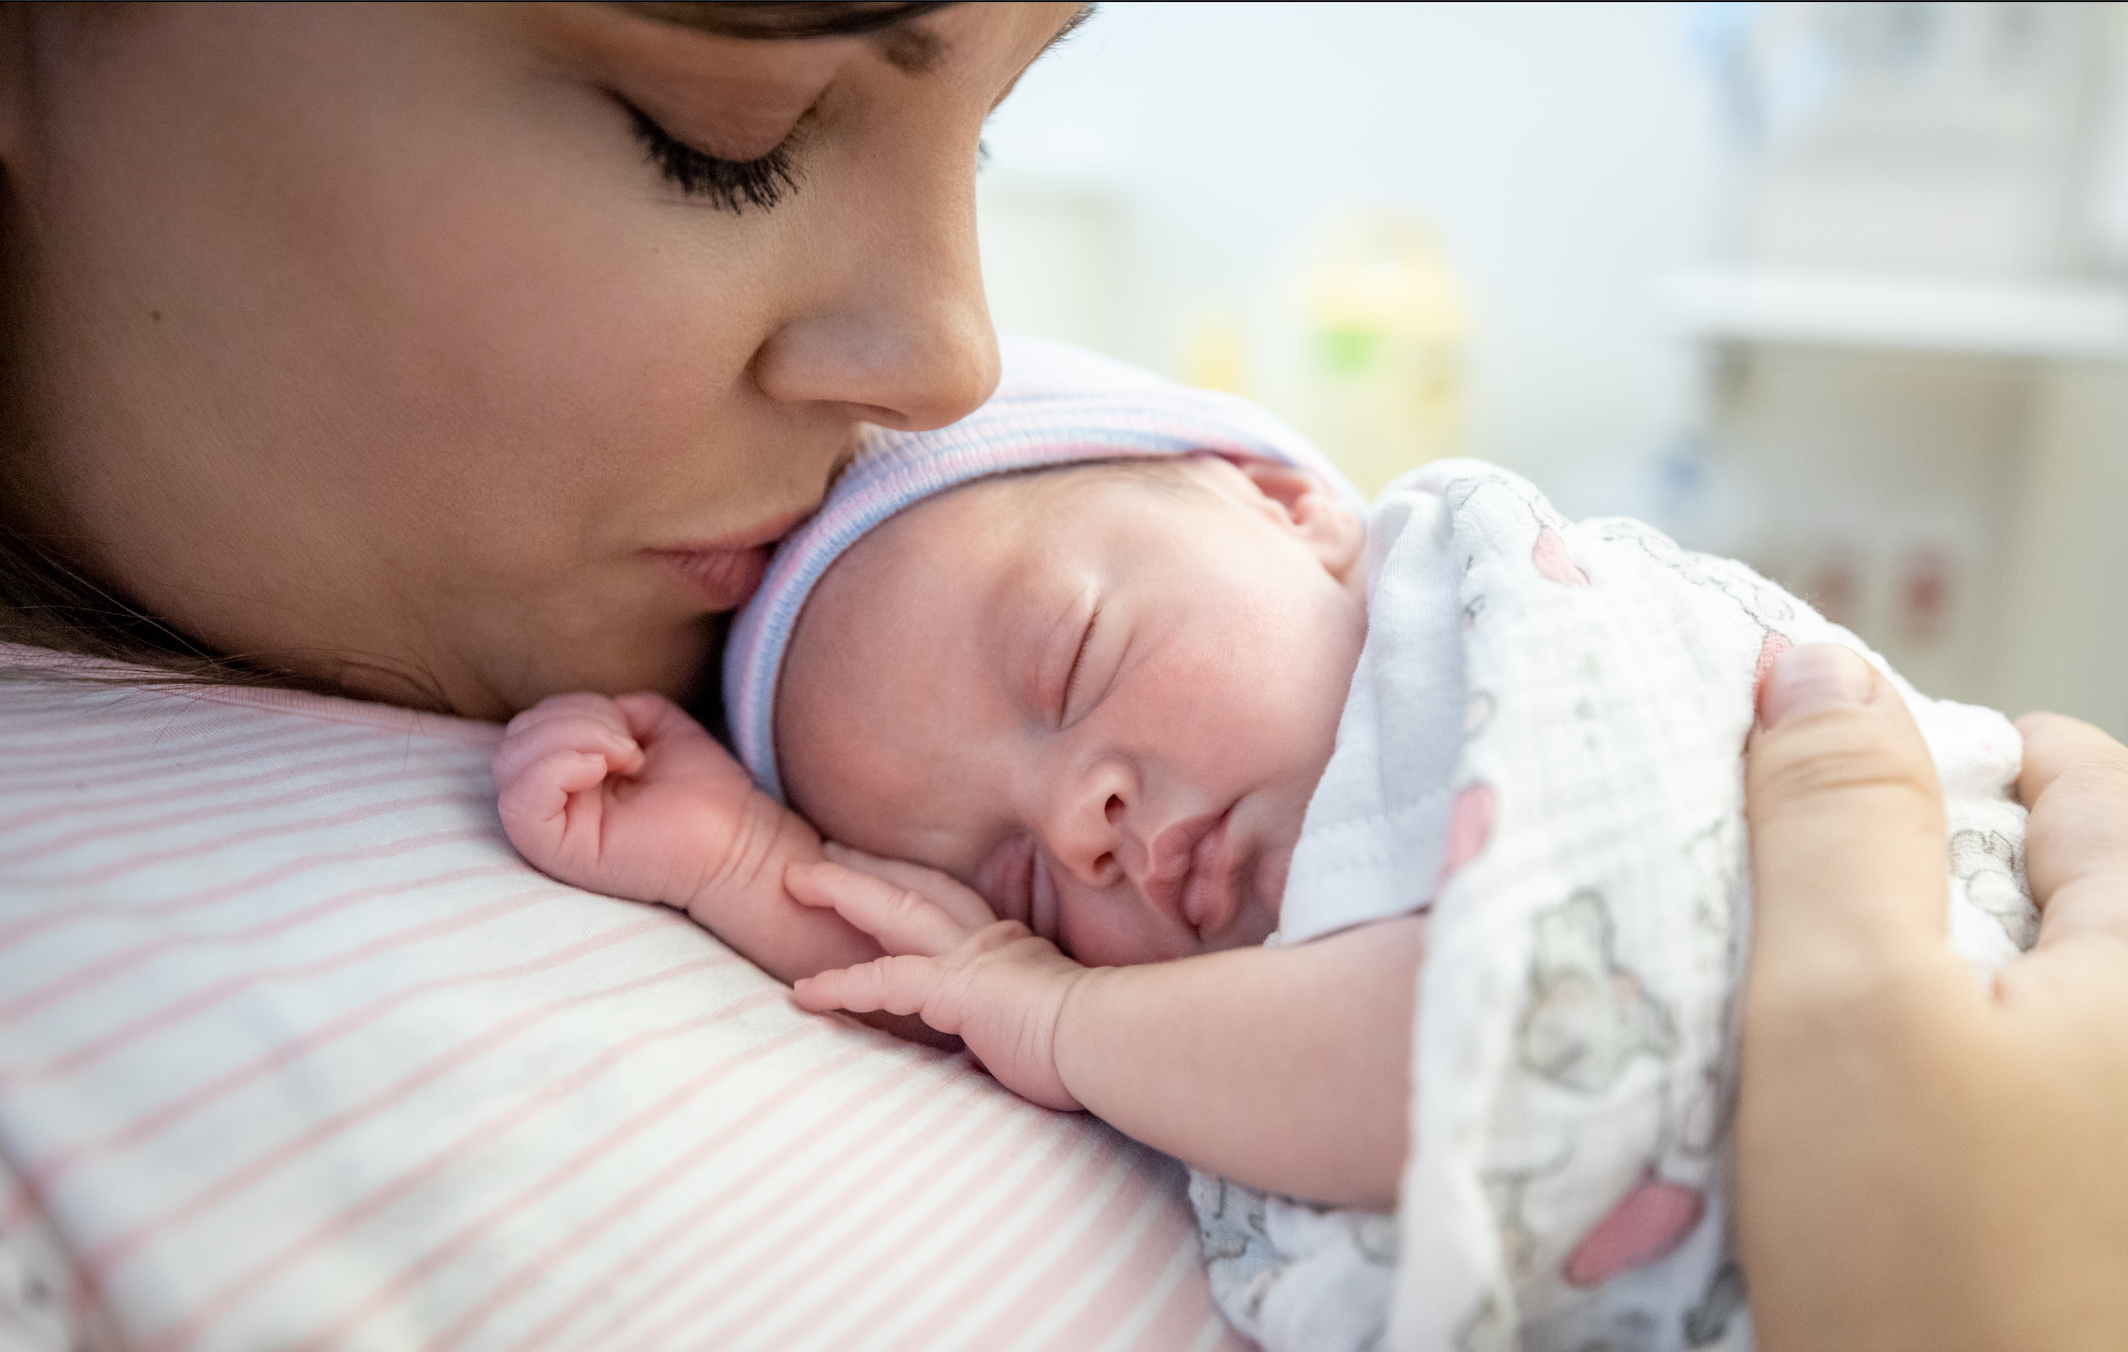 A parent’s perspective and 6 ways you can support a NICU family